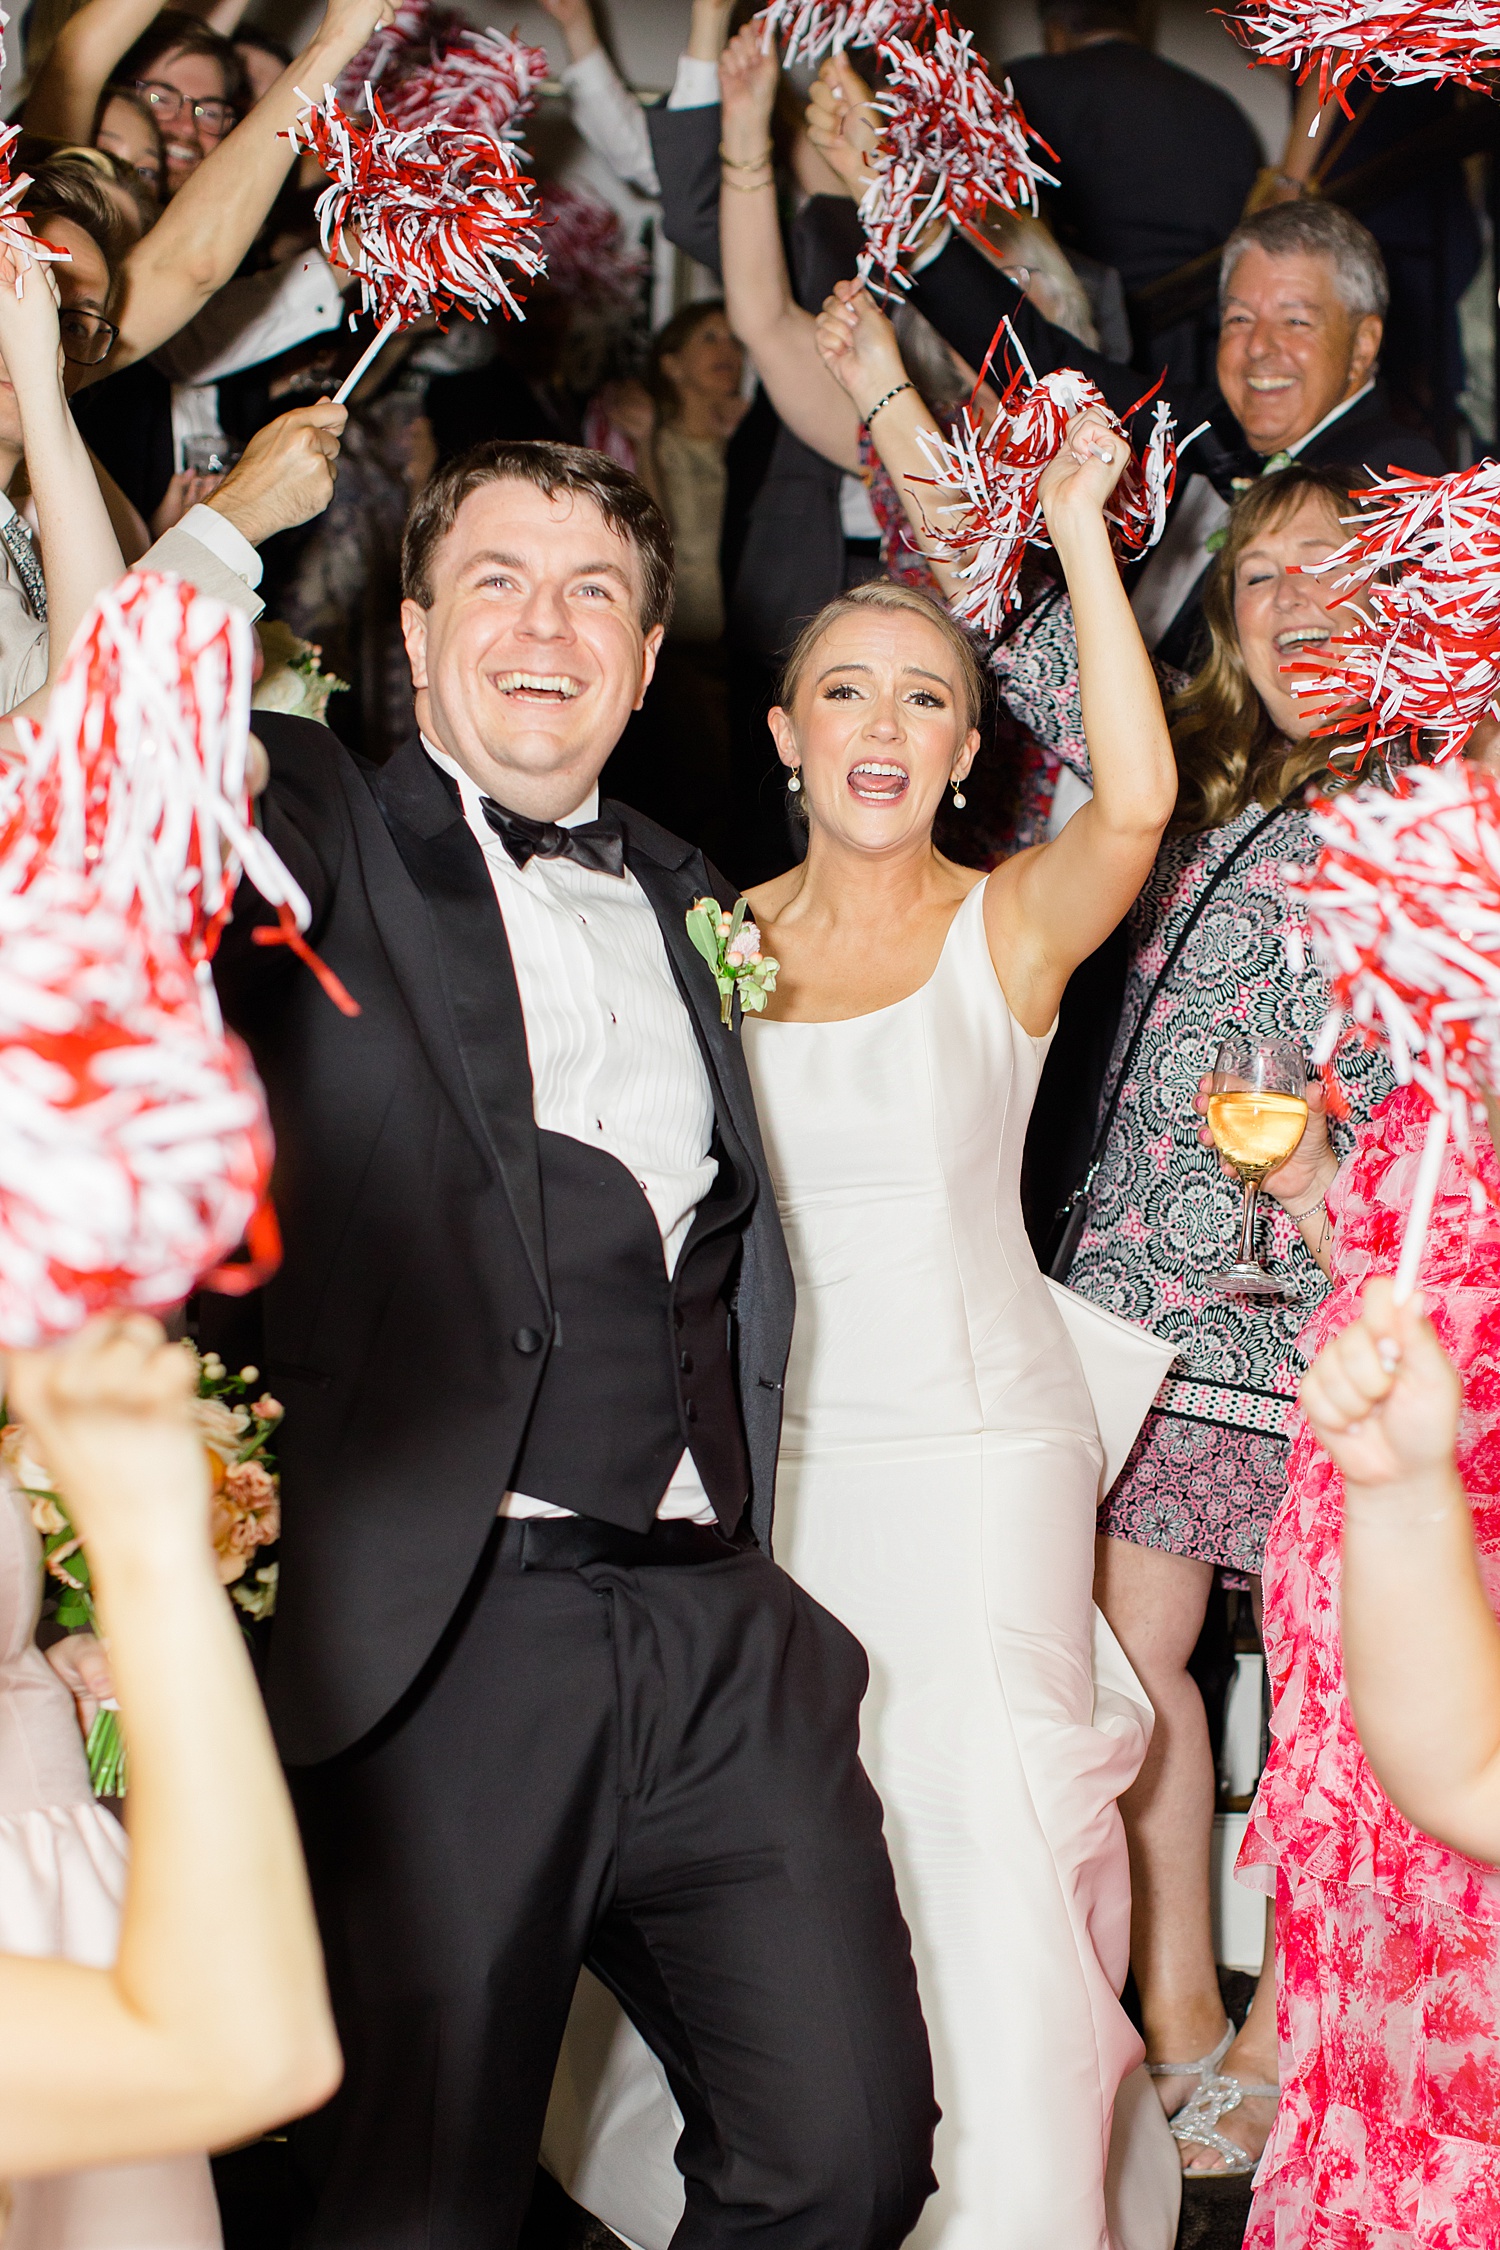 newlyweds exit reception with guests waving red and white pom poms